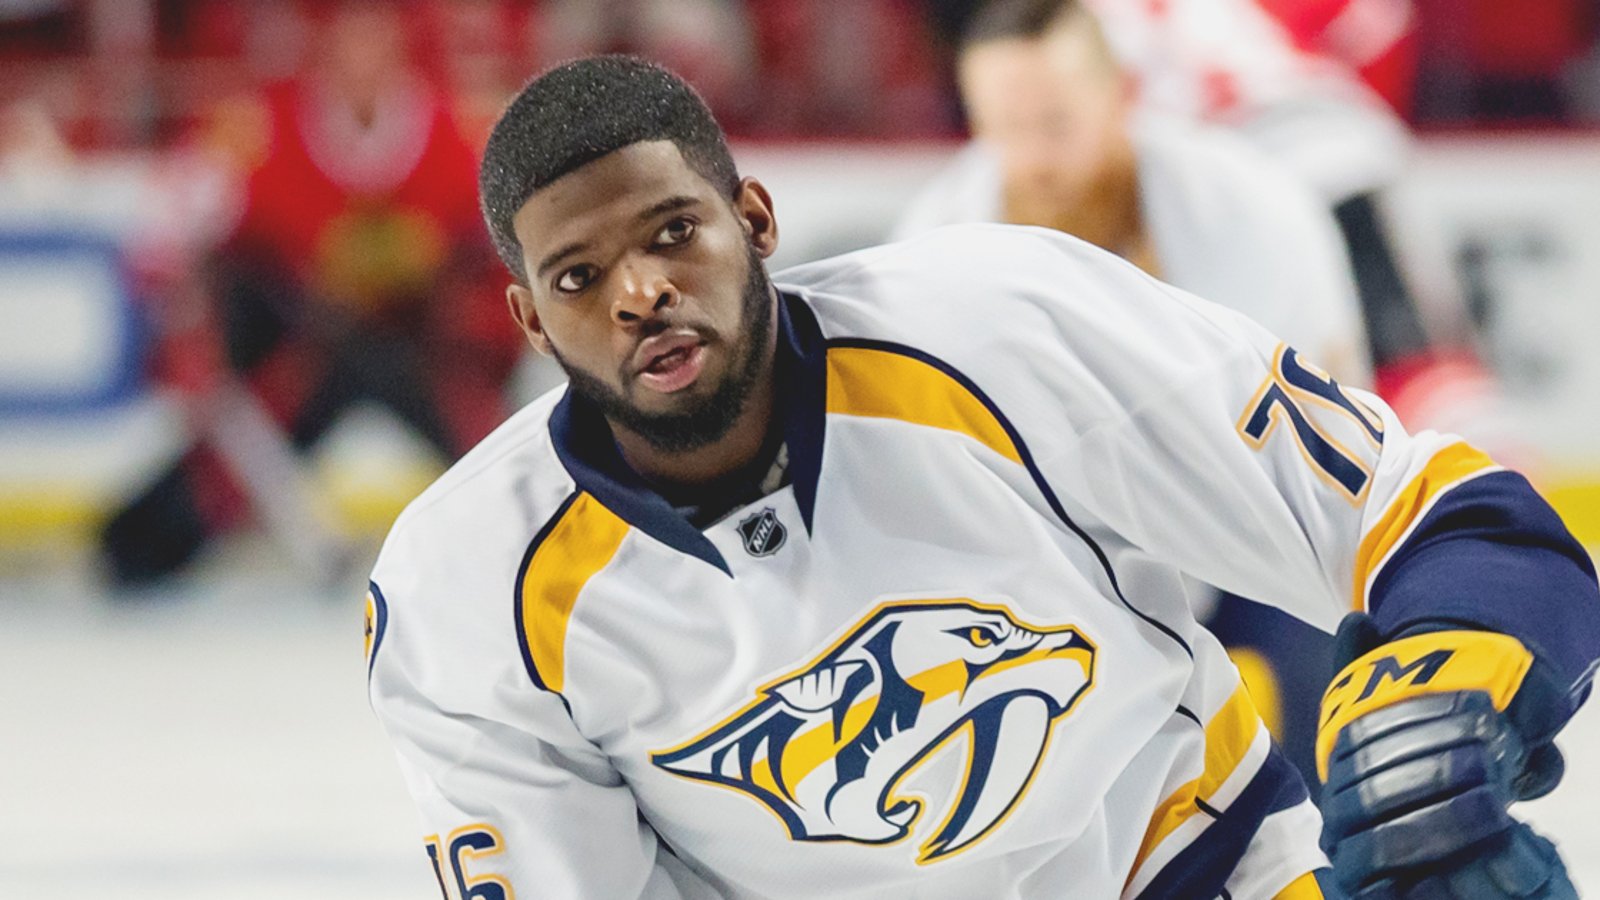 P.K. Subban called “a clown” by veteran insider live on TV